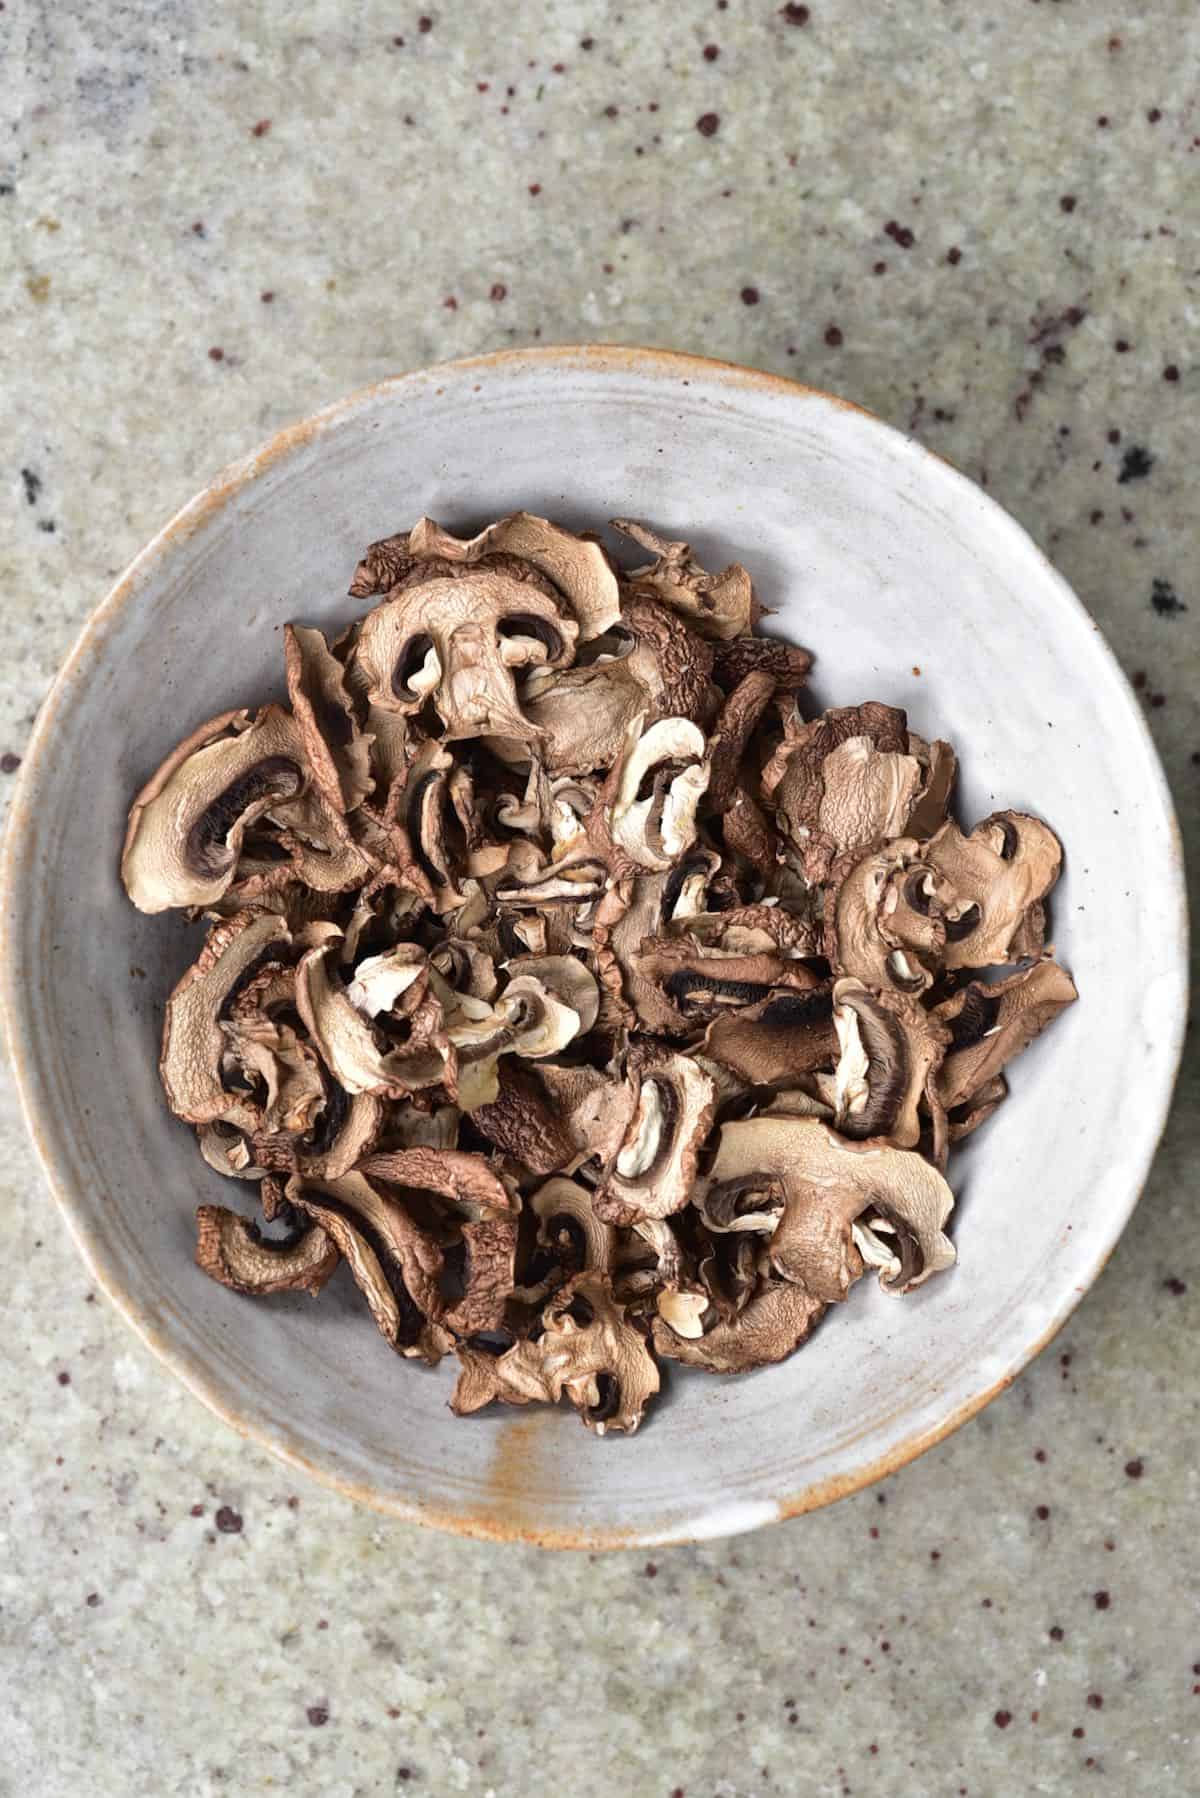 https://www.alphafoodie.com/wp-content/uploads/2021/02/How-to-Dry-mushrooms-4-of-5.jpeg